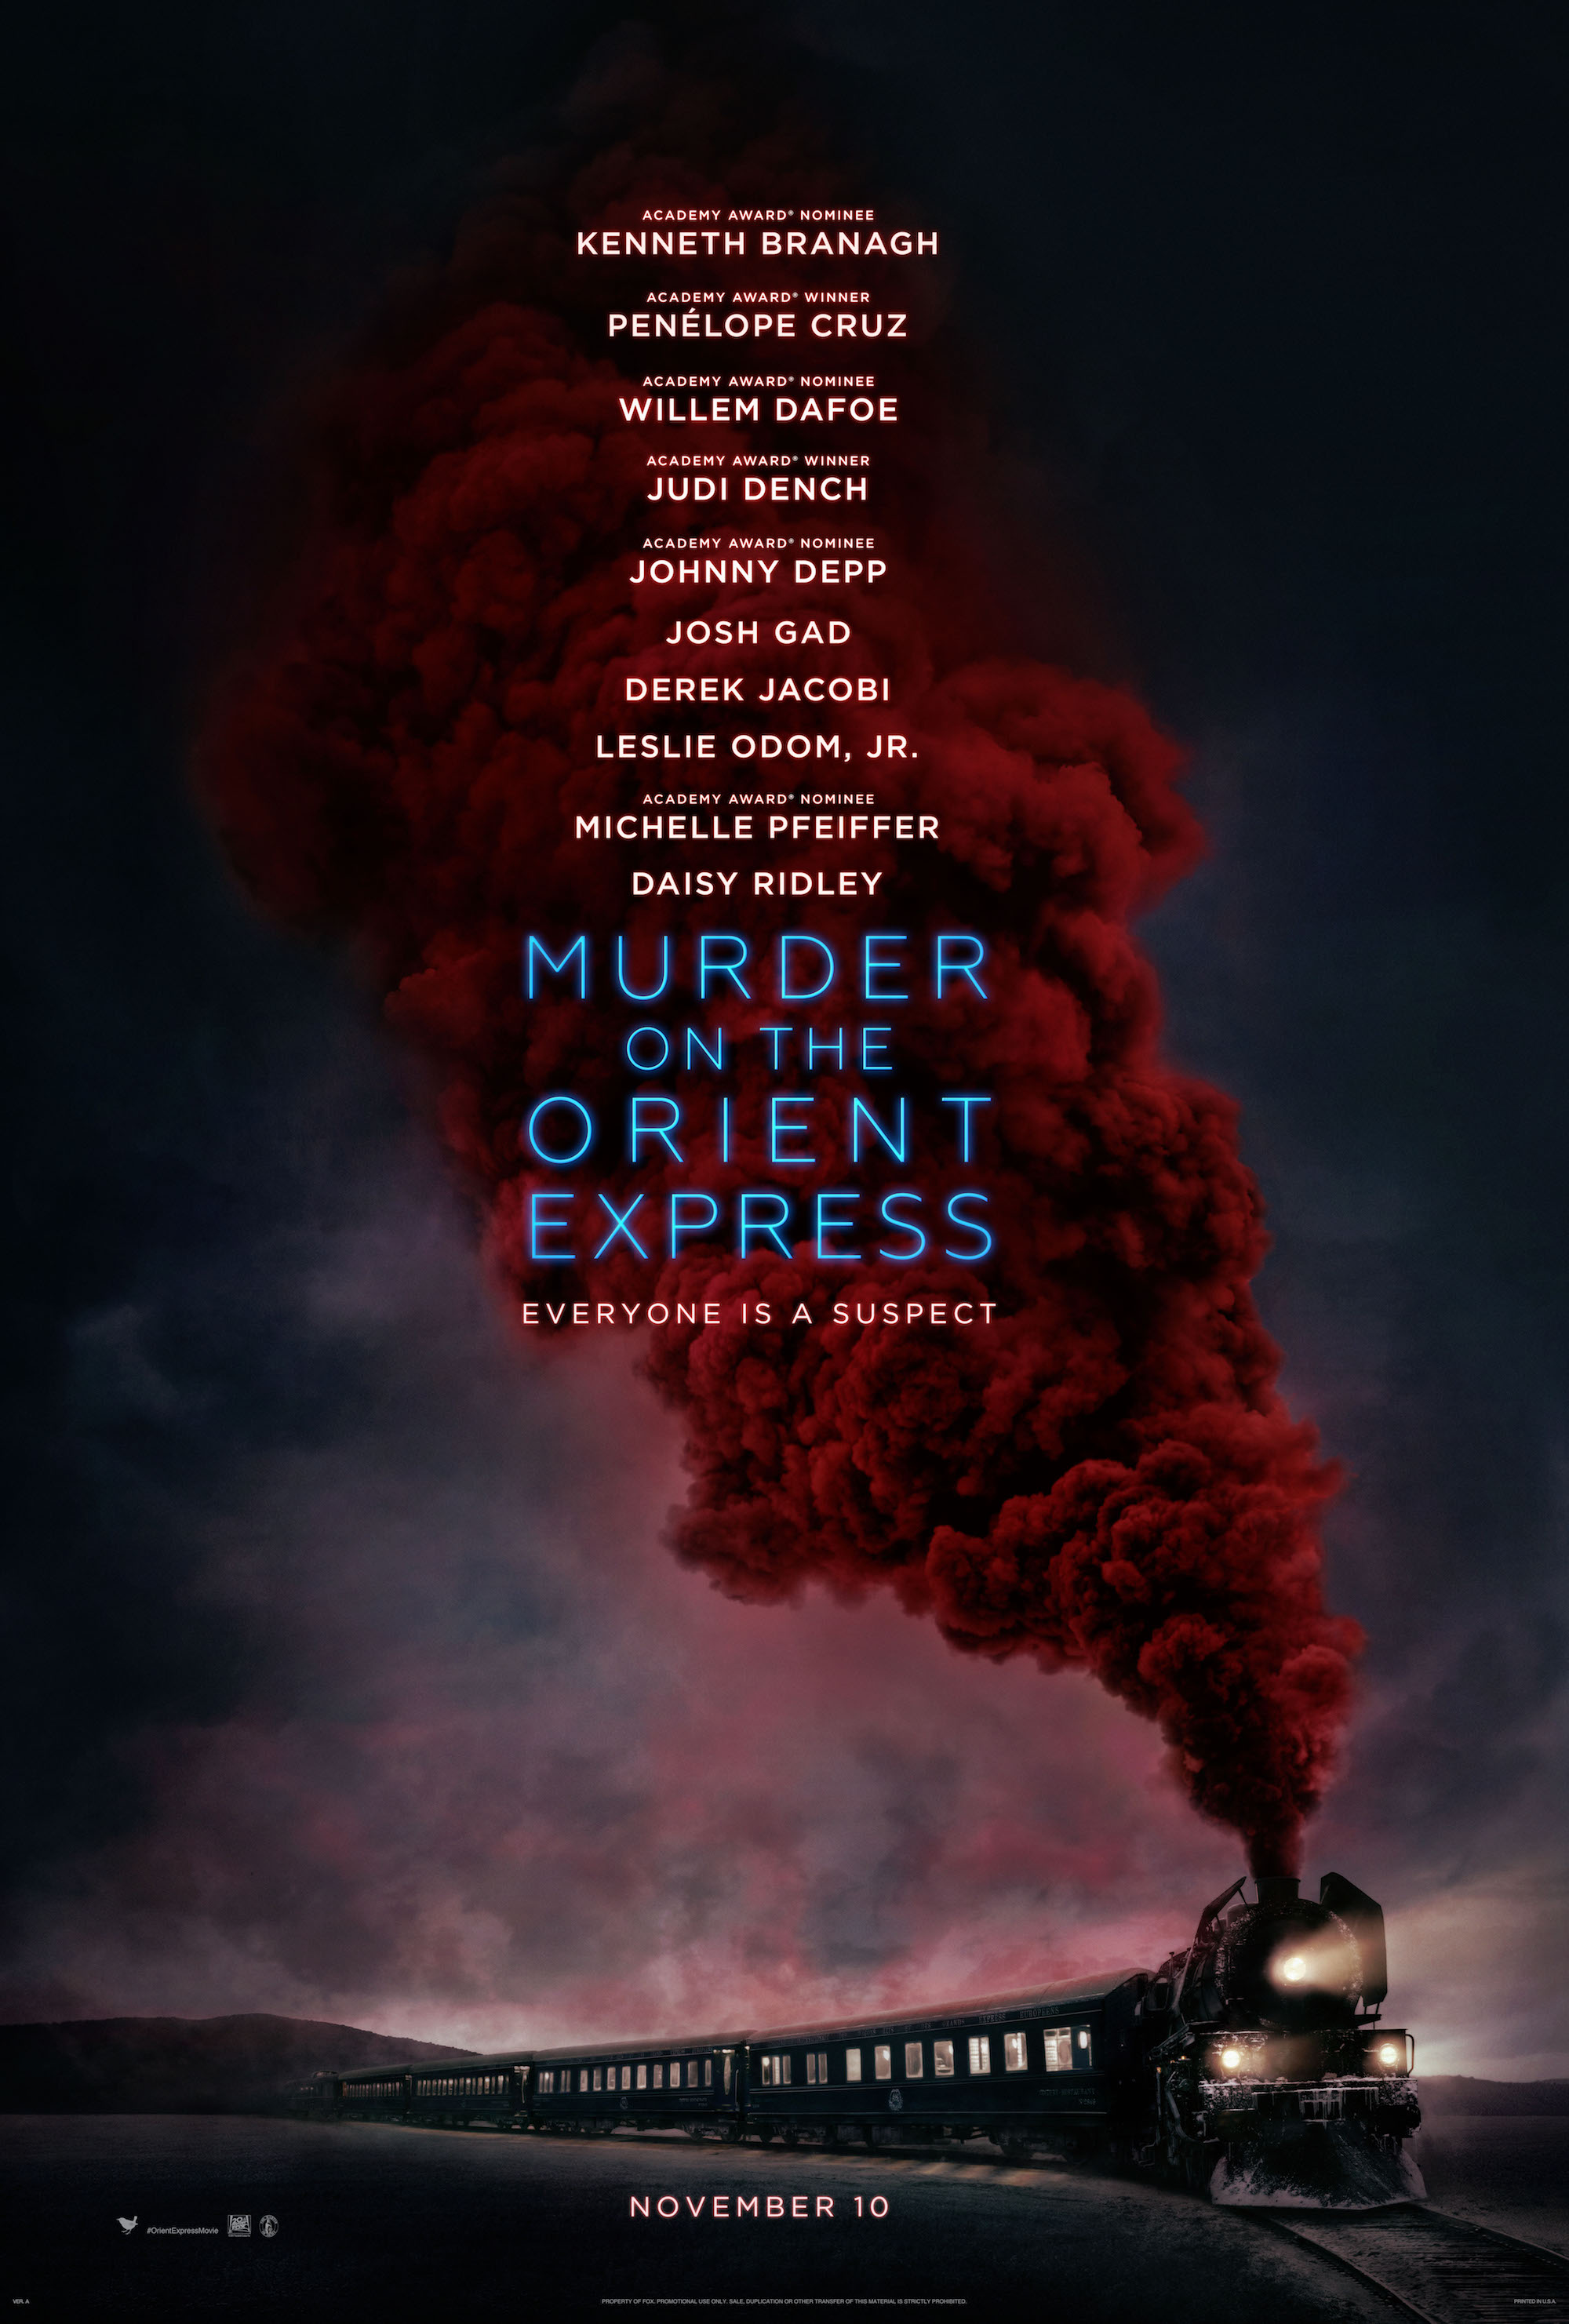 Murder on the Orient Express Entertainment Weekly Movie Poster